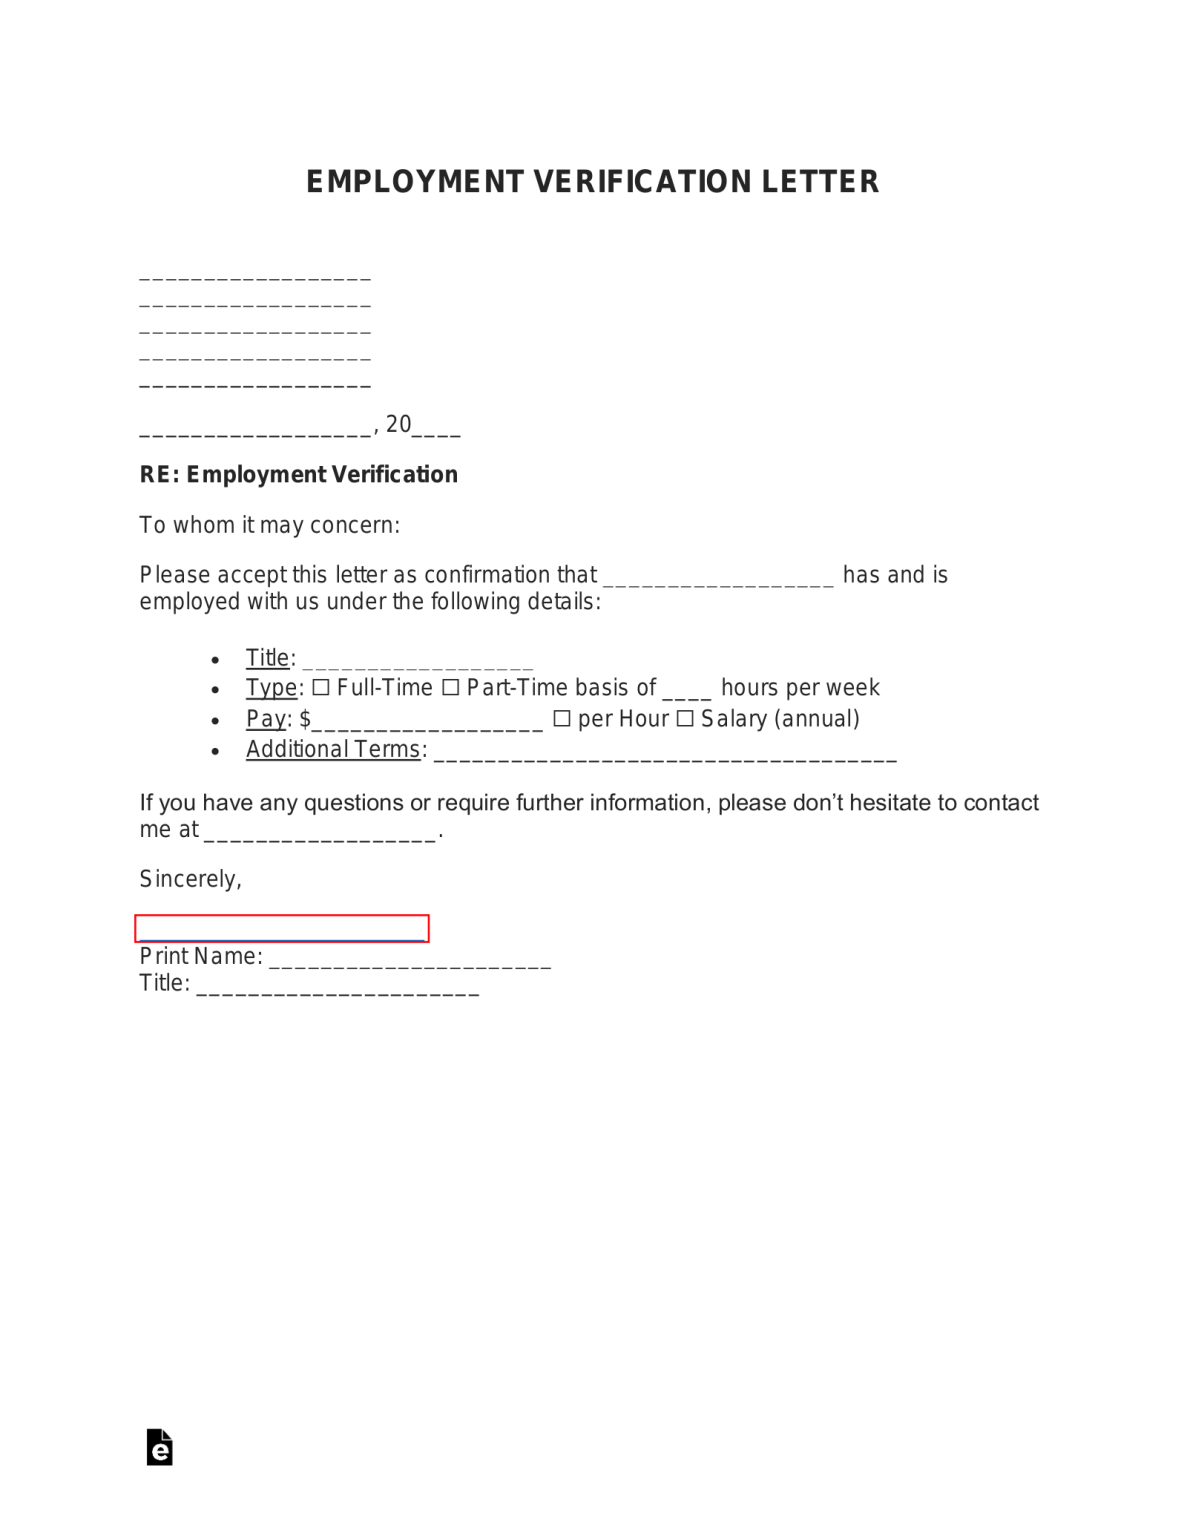 How To Get Employment Verification Letter